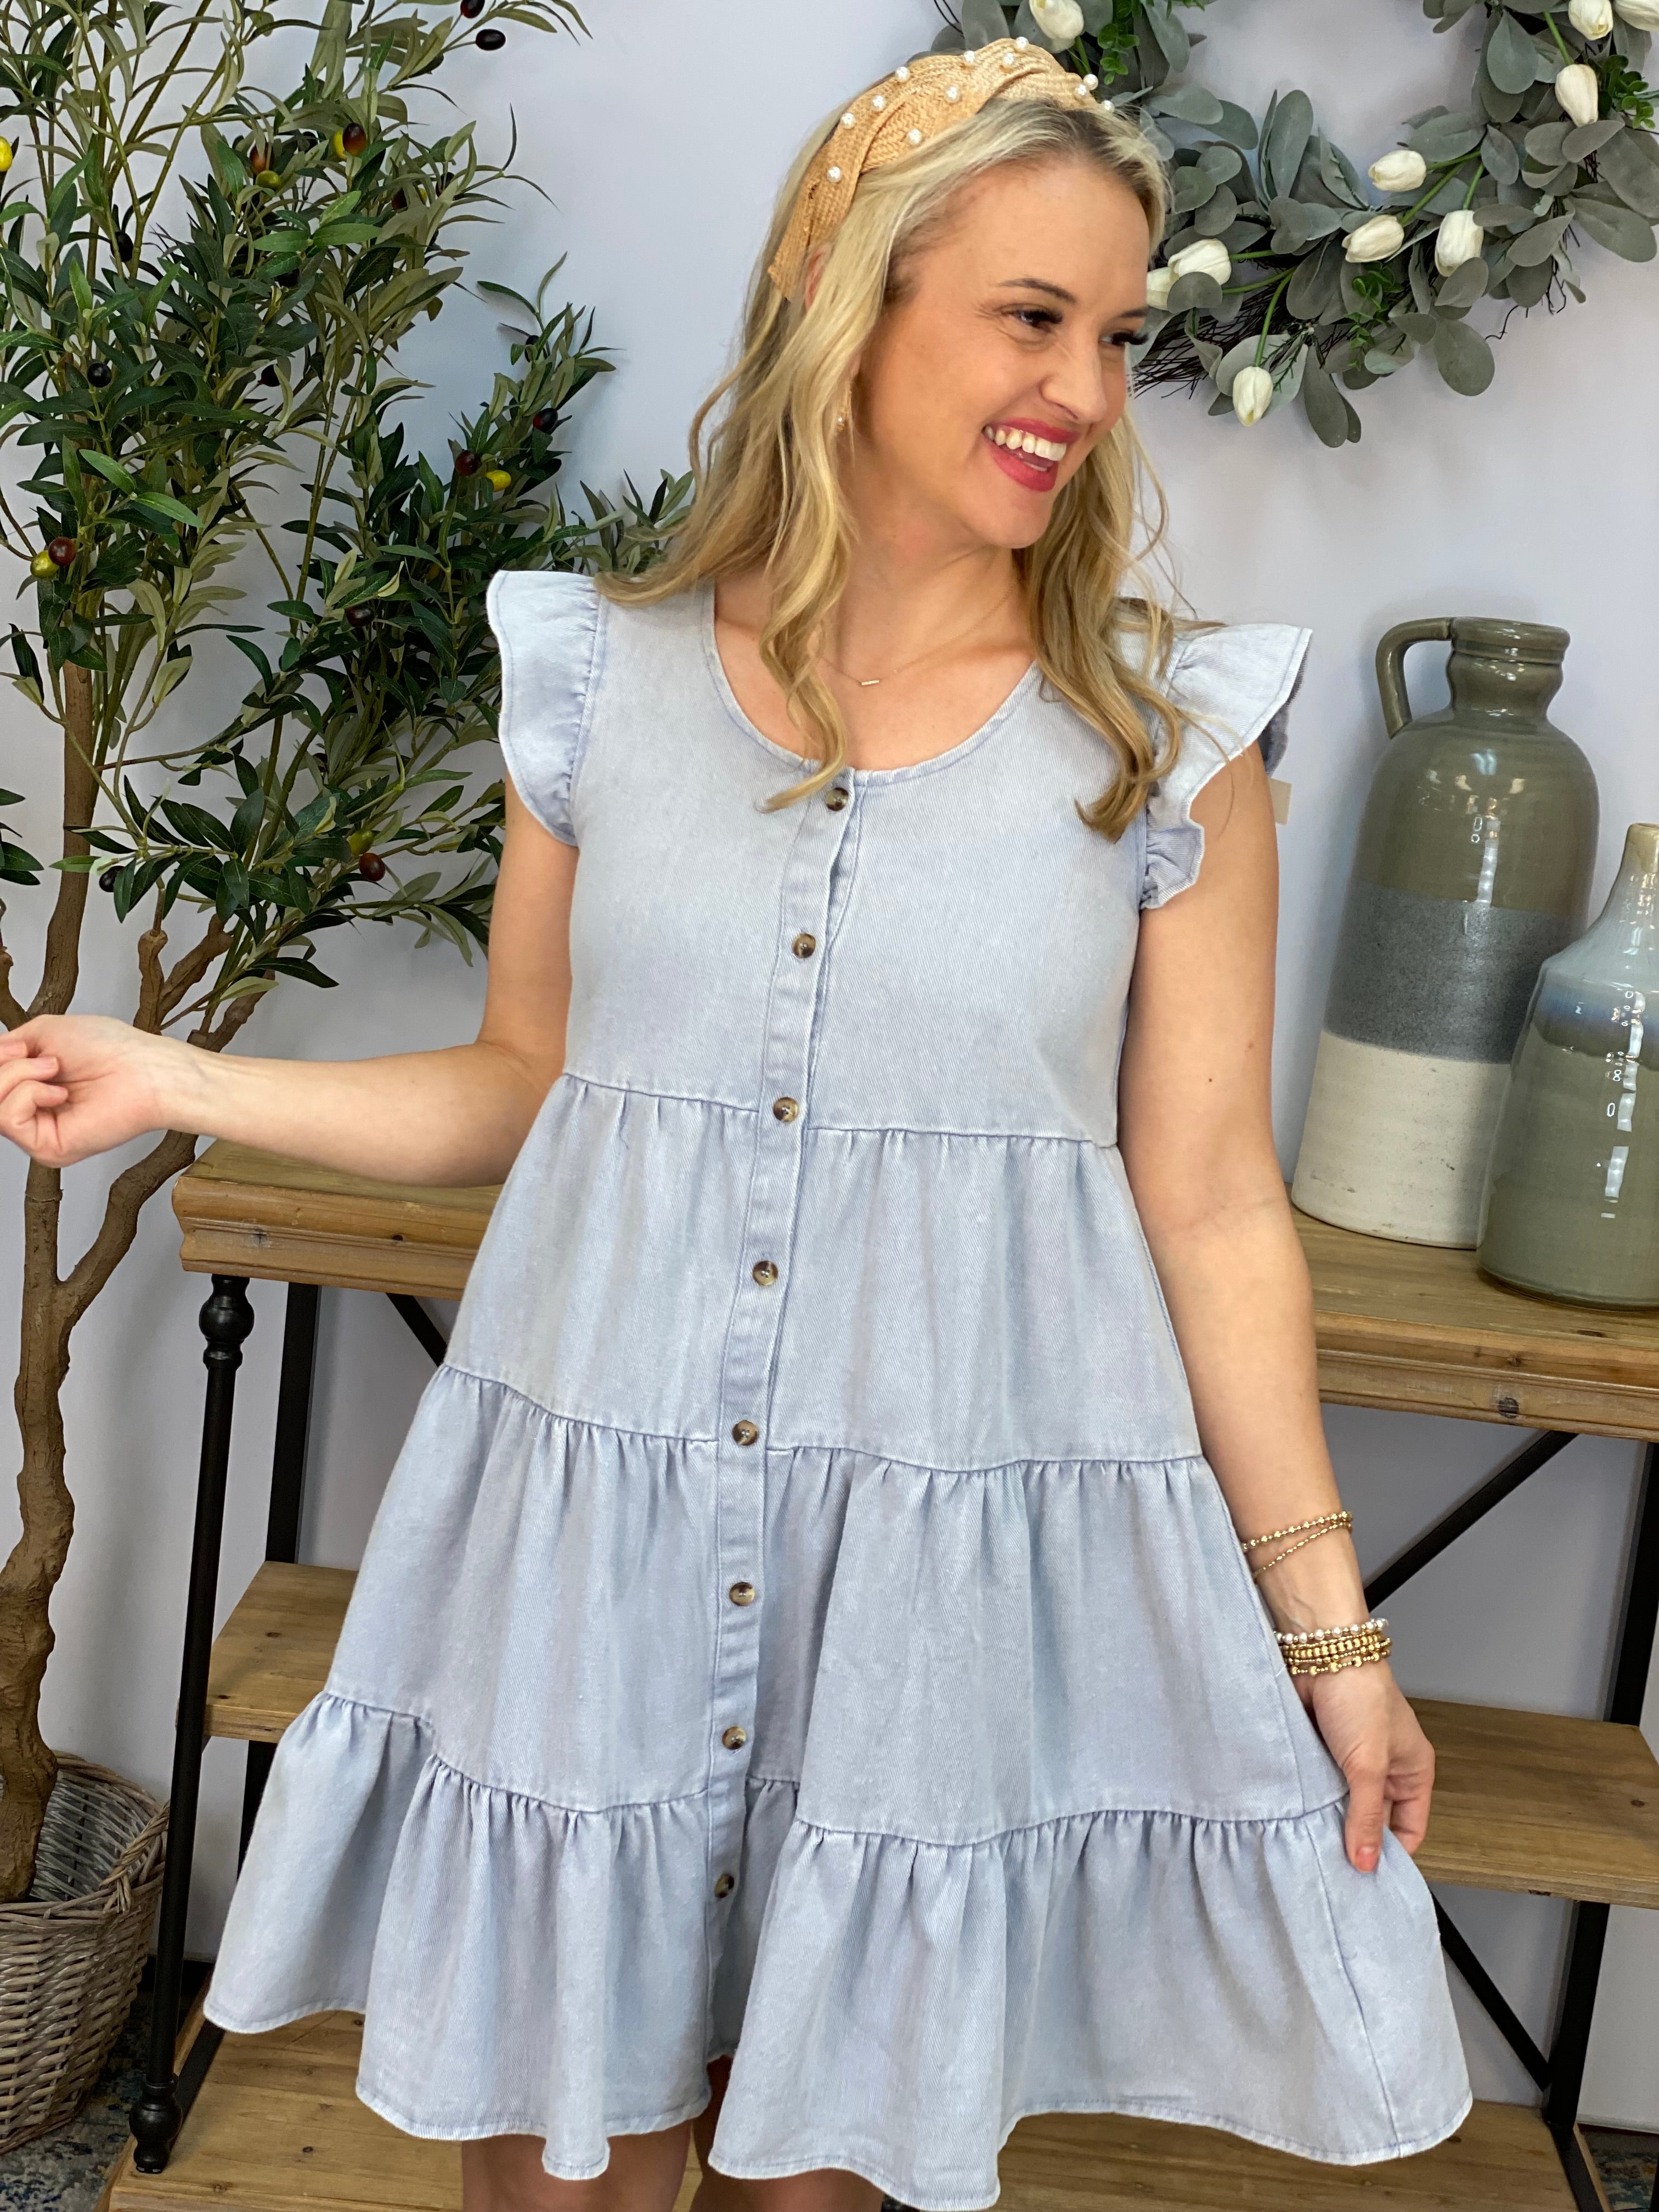 Darling in Denim Dress-180 Dresses-The Lovely Closet-The Lovely Closet, Women's Fashion Boutique in Alexandria, KY